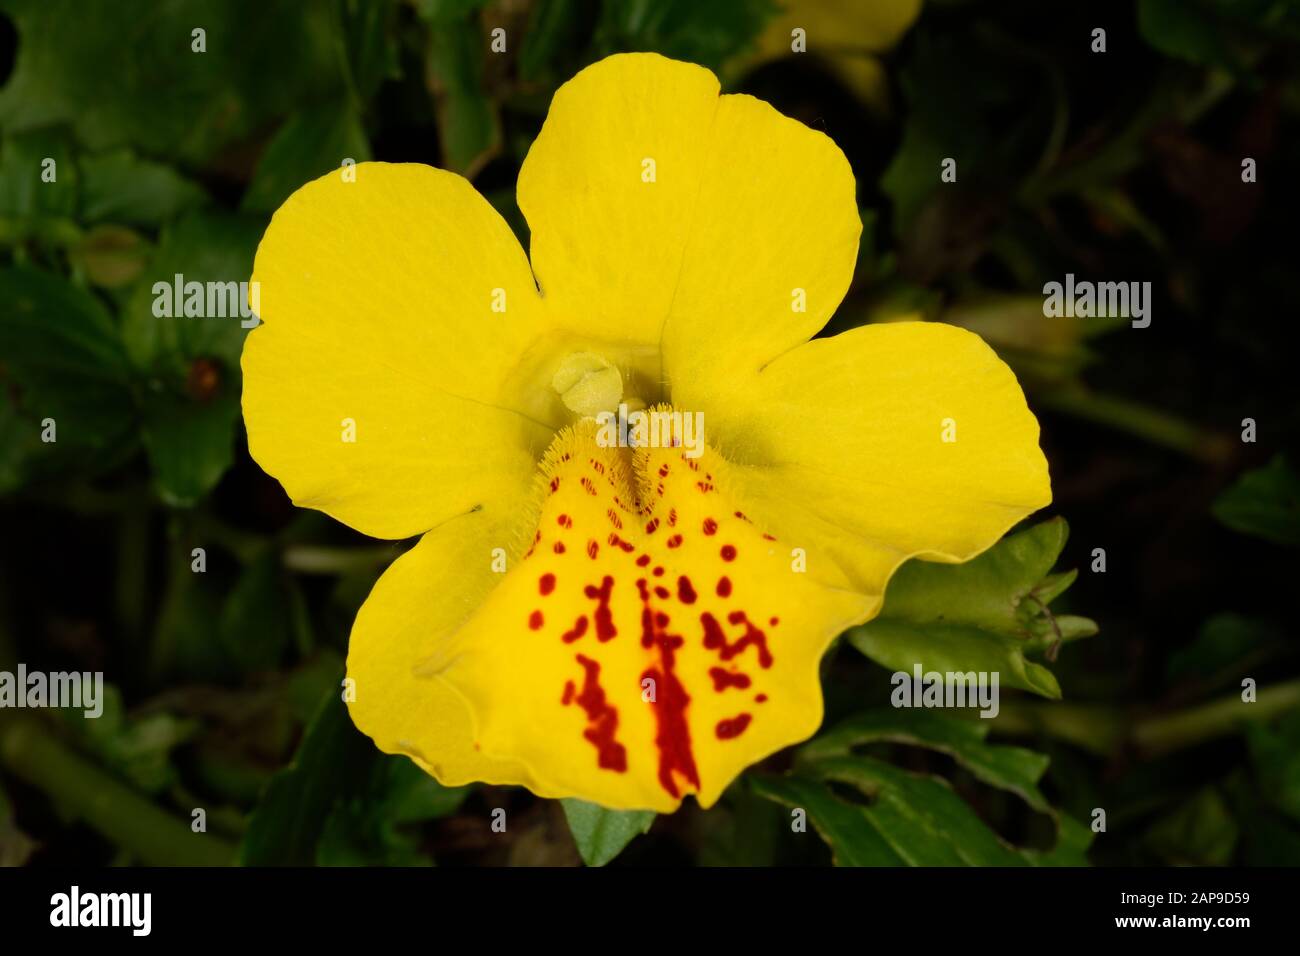 Mimulus  also Monkey Flower. Close up of a single yellow flower with red patches on lower petal. Stock Photo